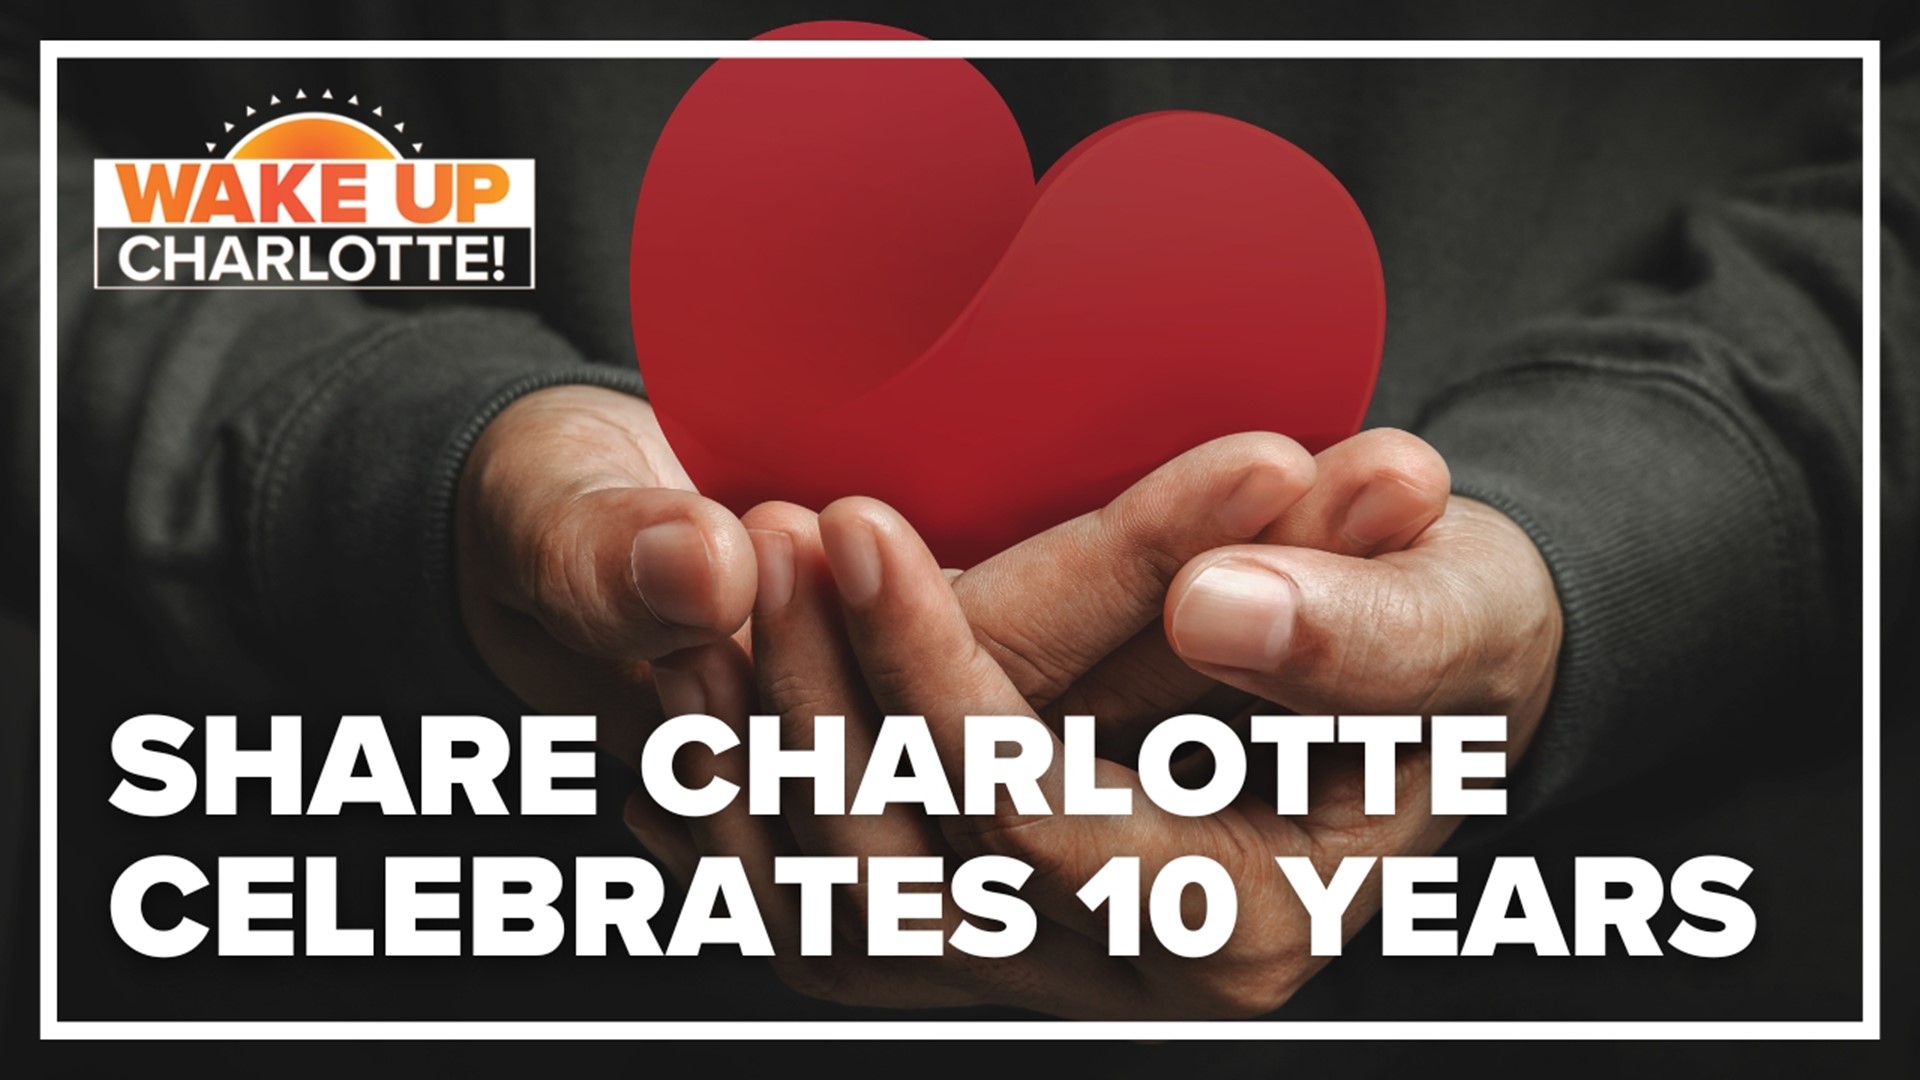 SHARE Charlotte has generated millions of dollars and thousands of volunteer hours for nonprofits.